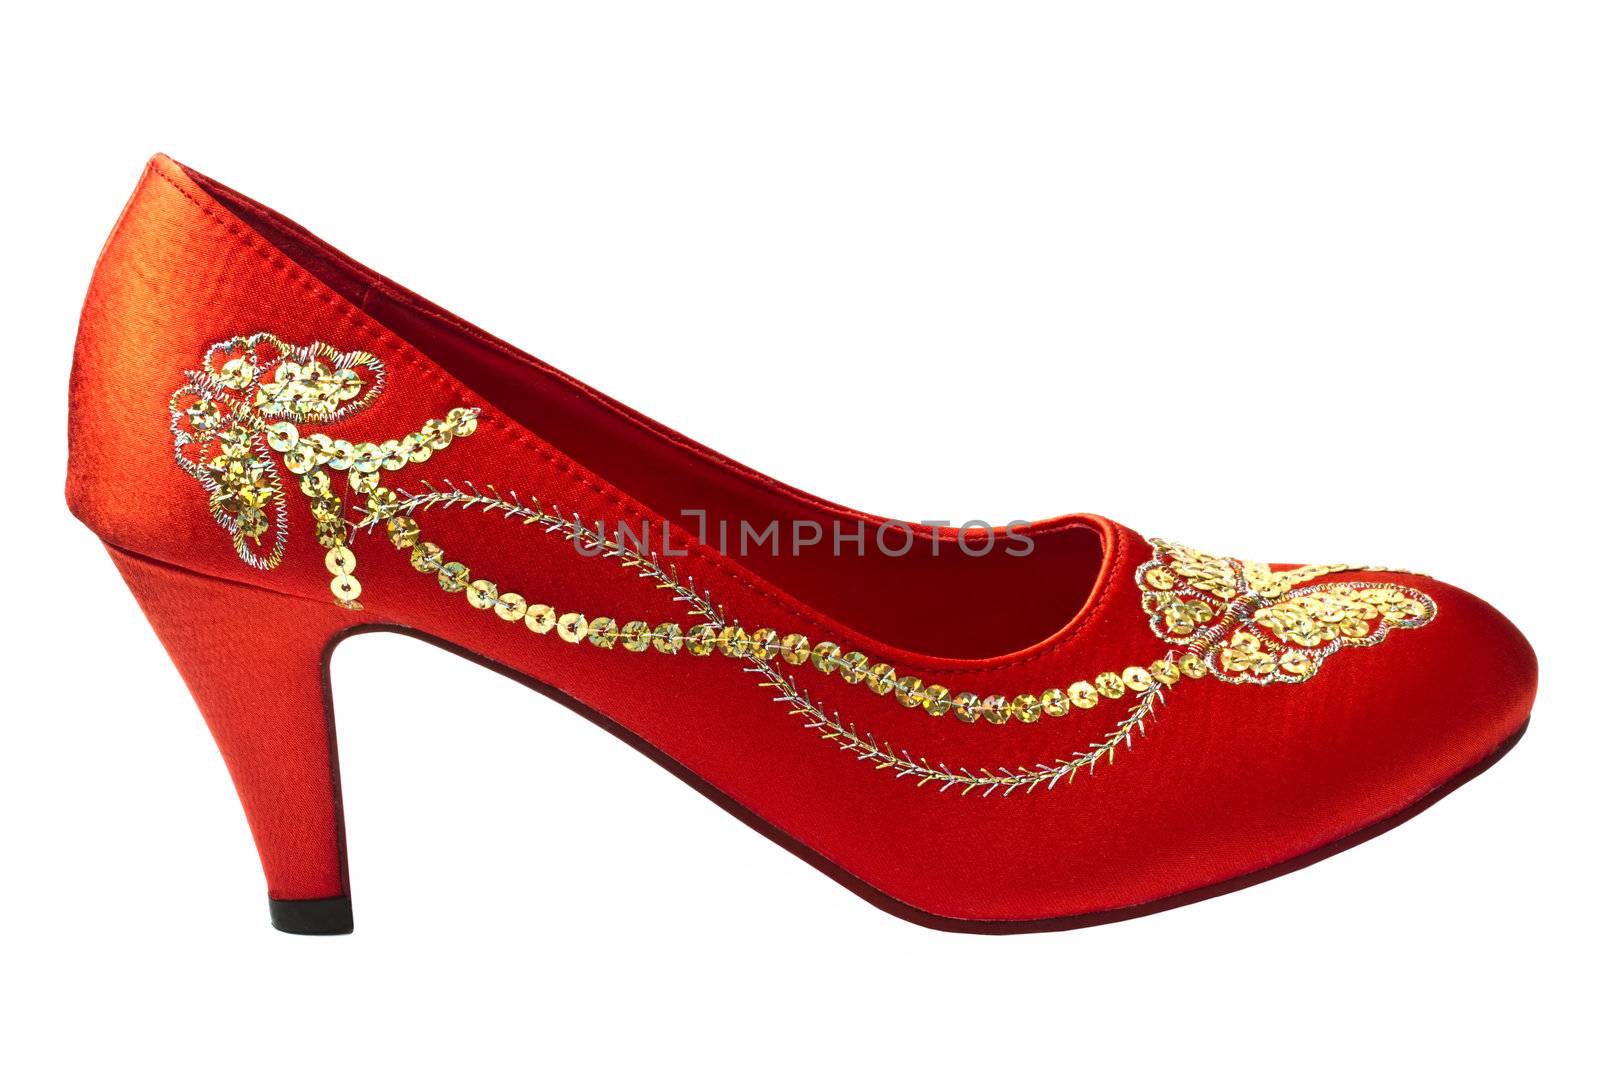 Embroidered red shoes by ibphoto